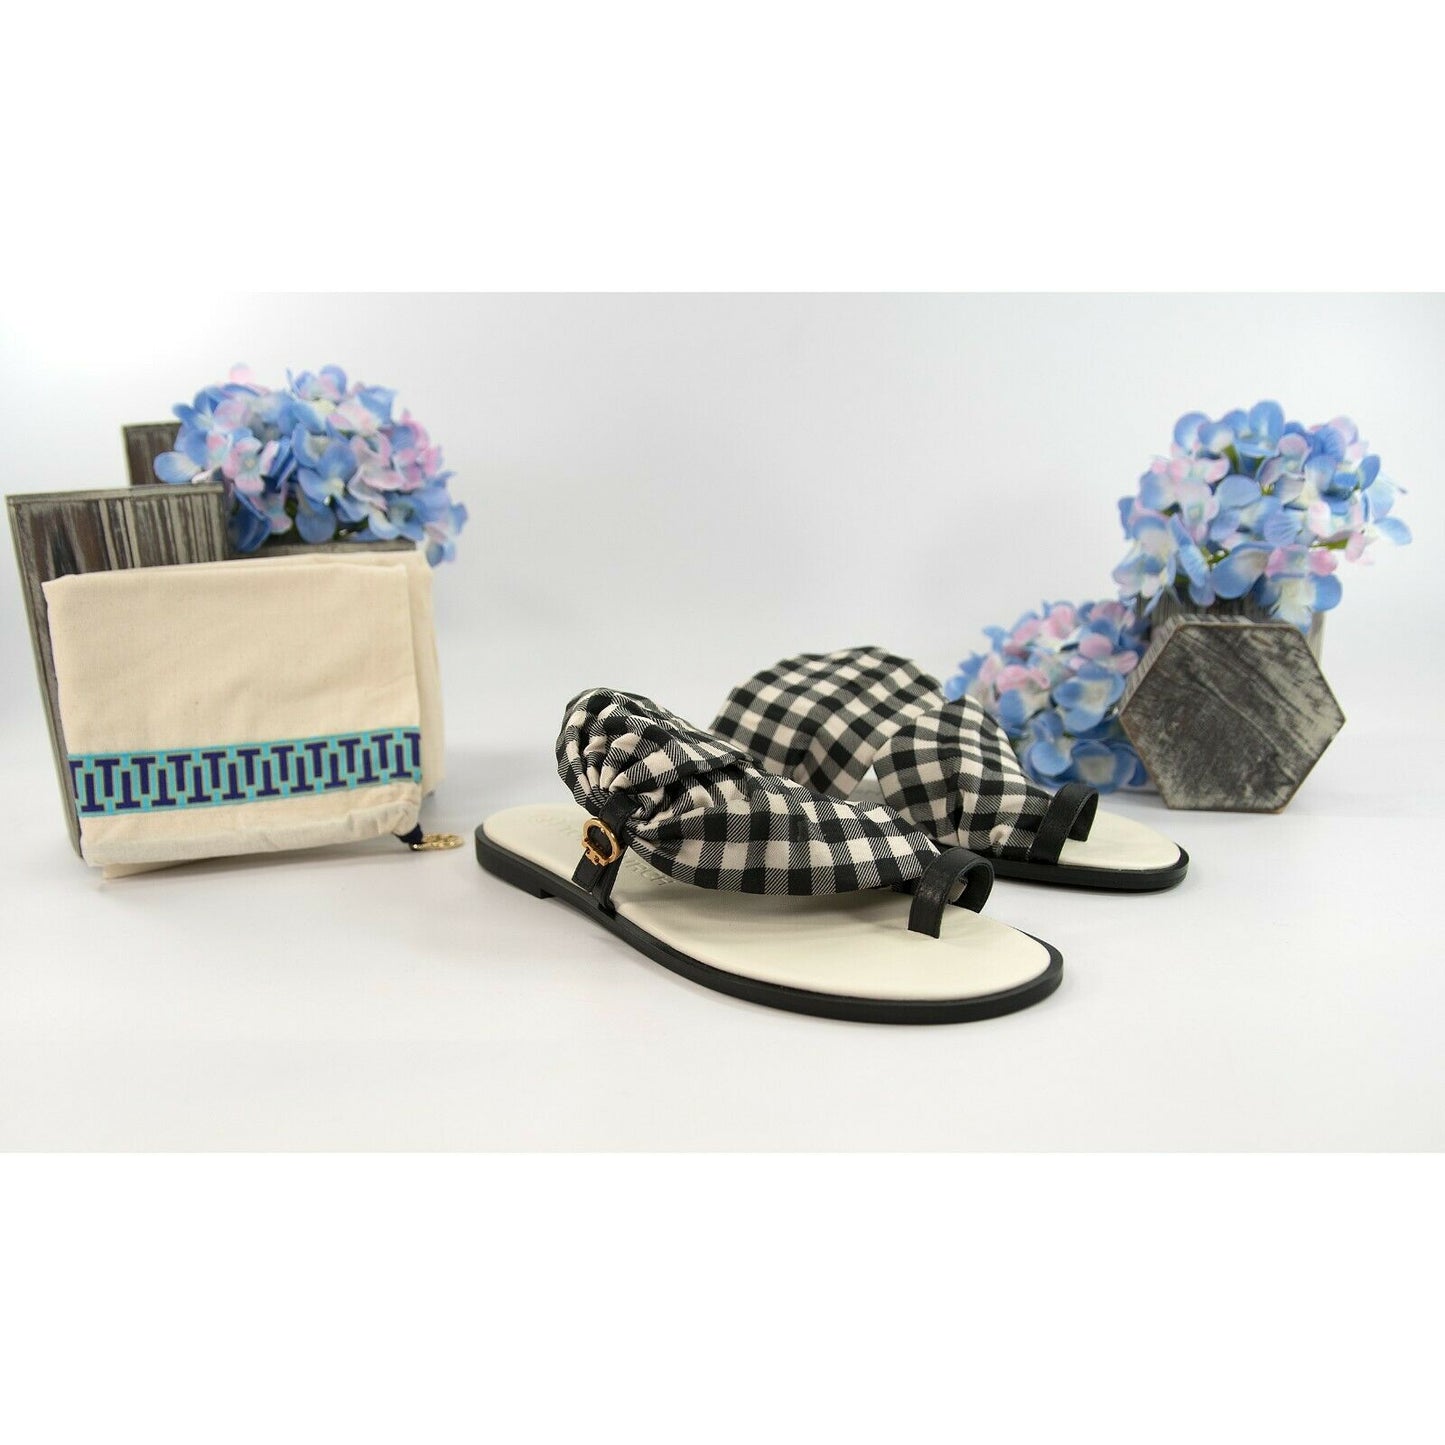 Tory Burch Black New Ivory Gingham Twill Leather Selby Scarf Sandals Size 8 NIB